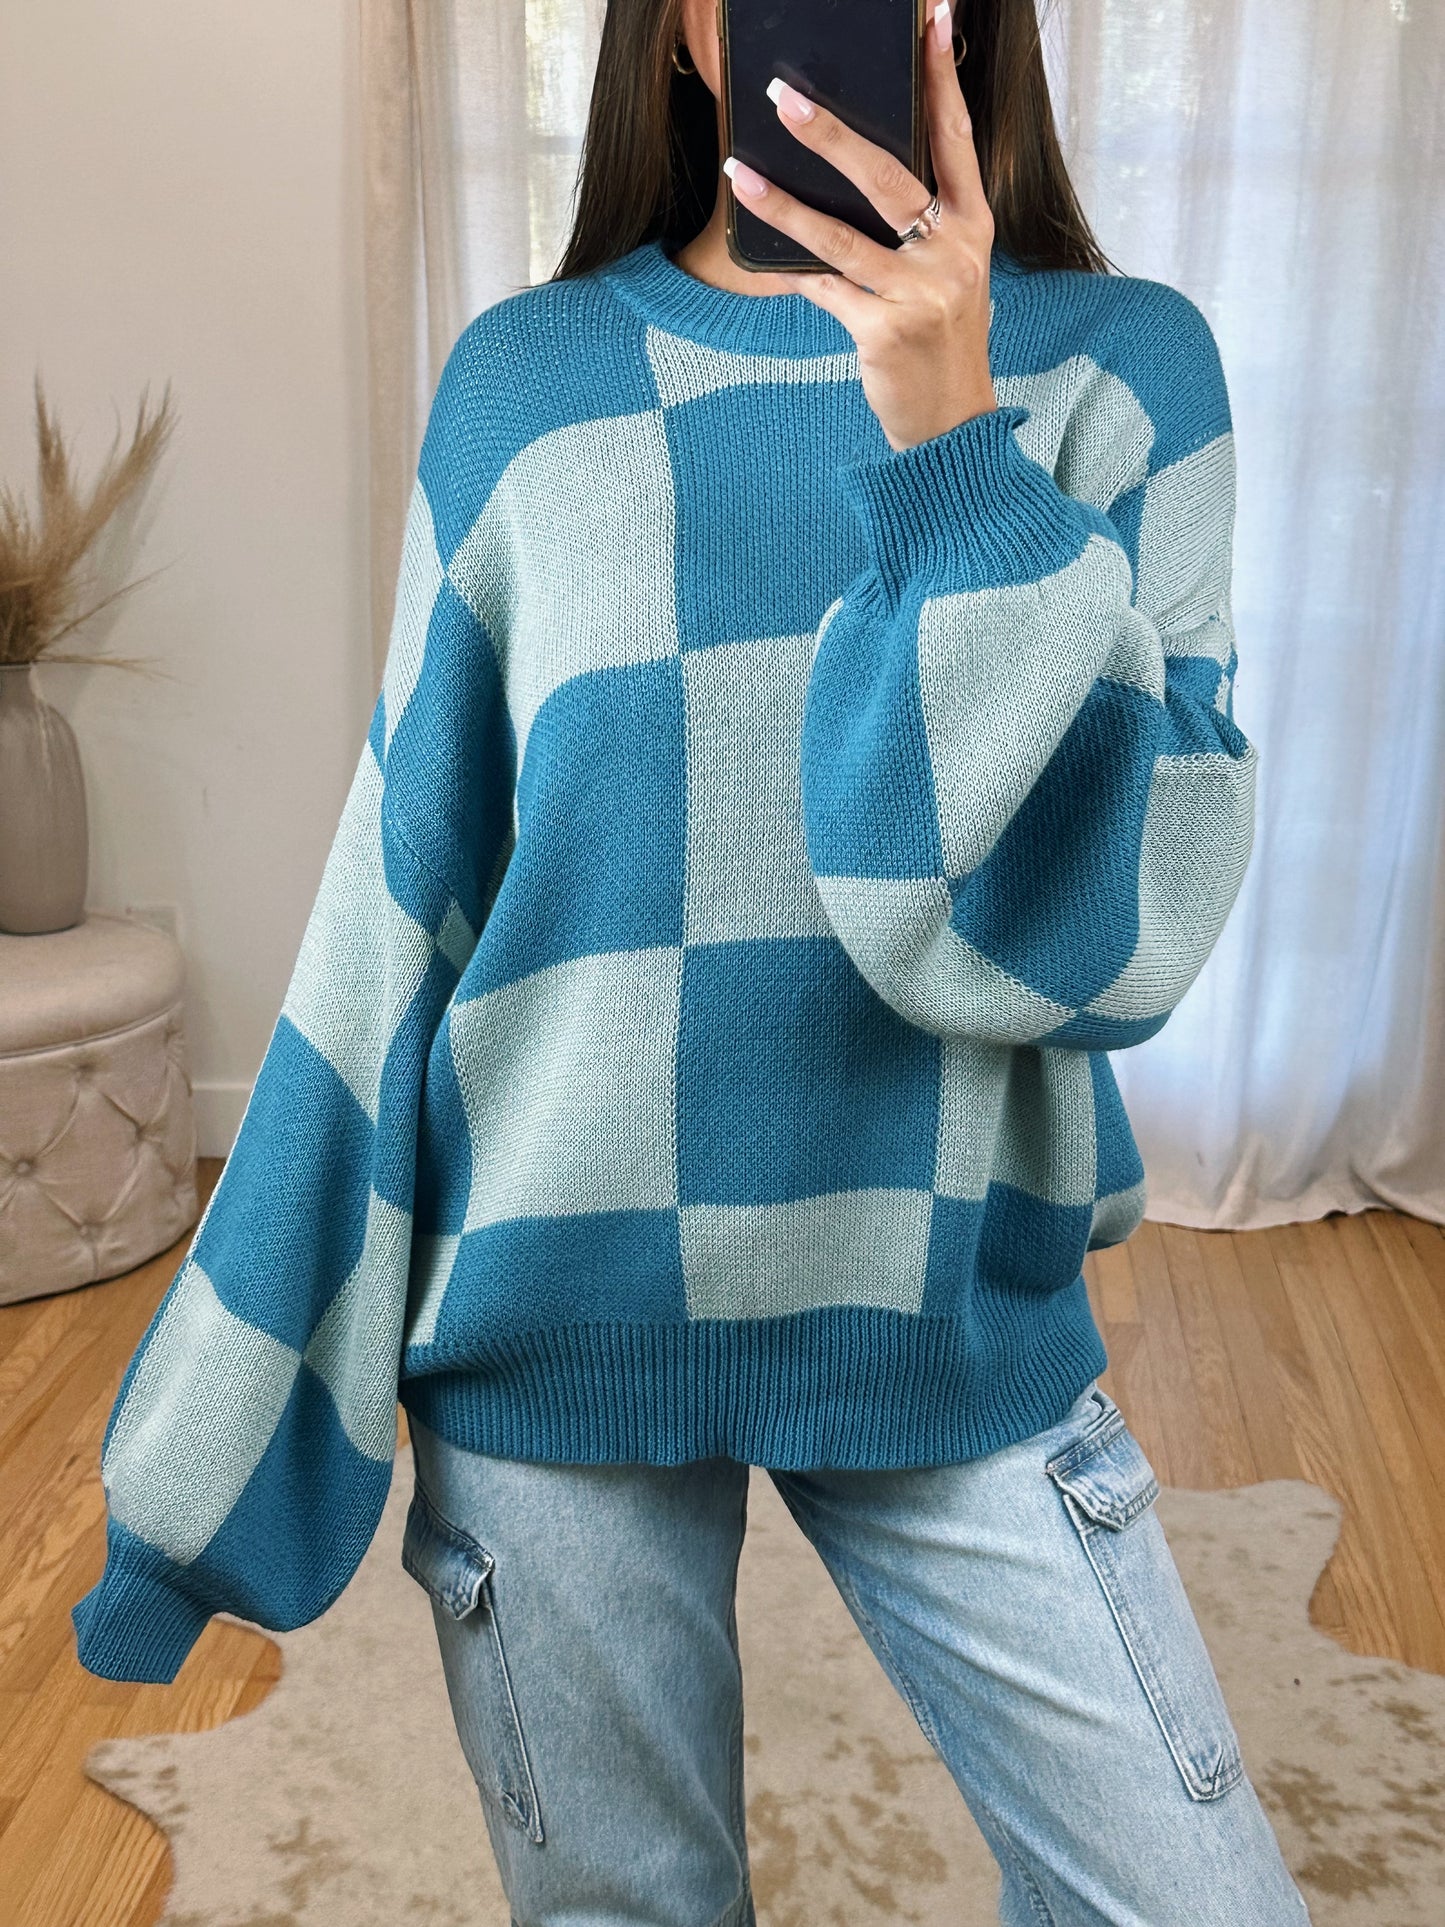 Double Check Sweater